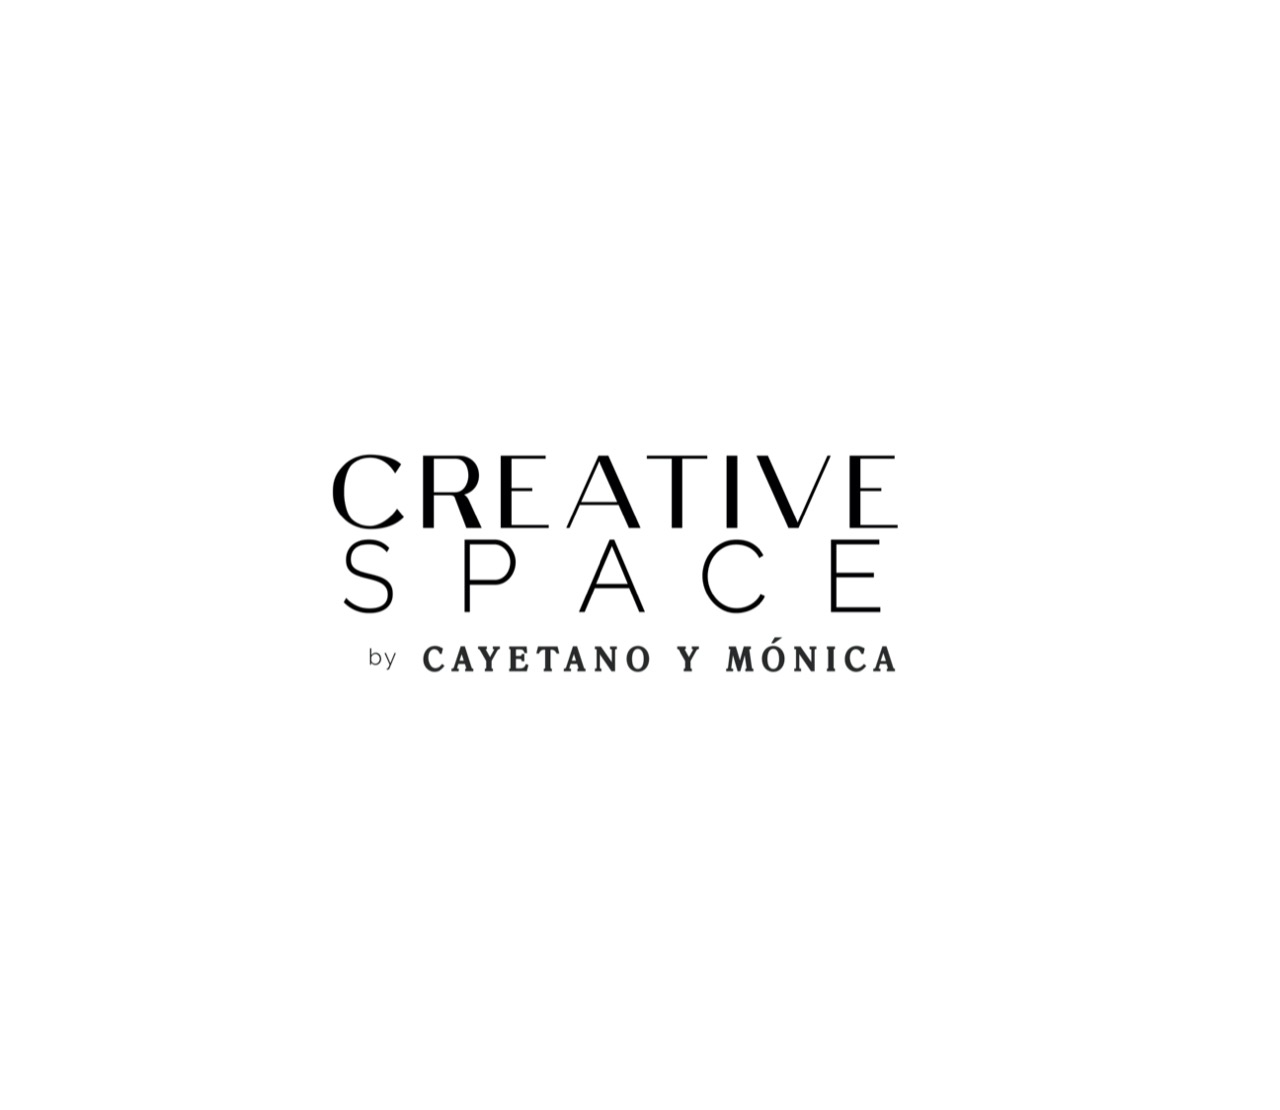 Creative space by Cayetano y Mónica